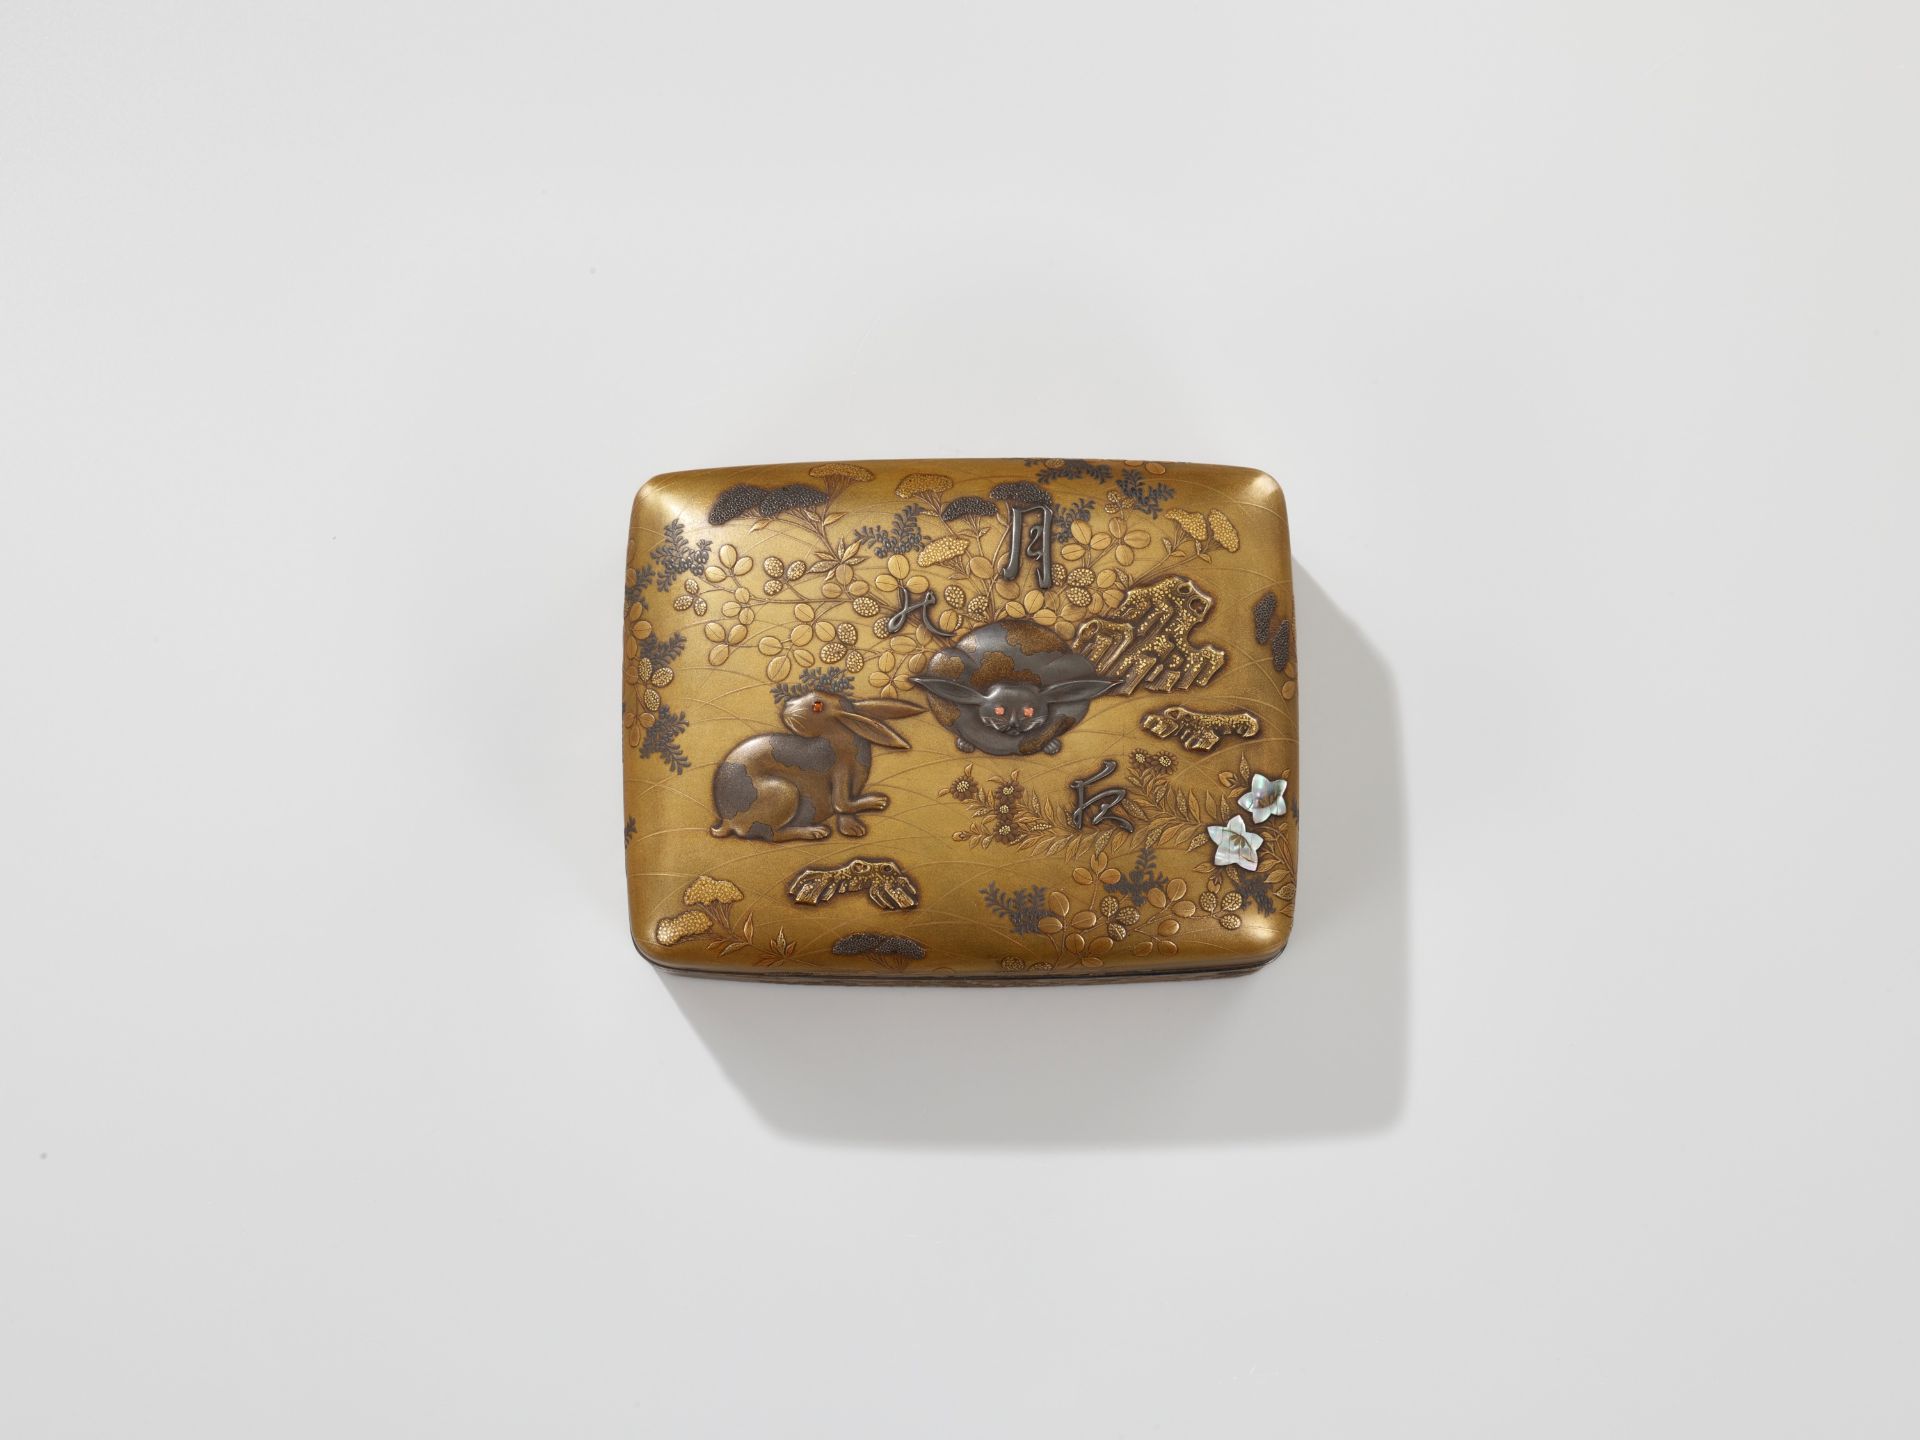 A VERY RARE AND SUPERB INLAID LACQUER BOX AND COVER DEPICTING LUNAR HARES - Image 8 of 11